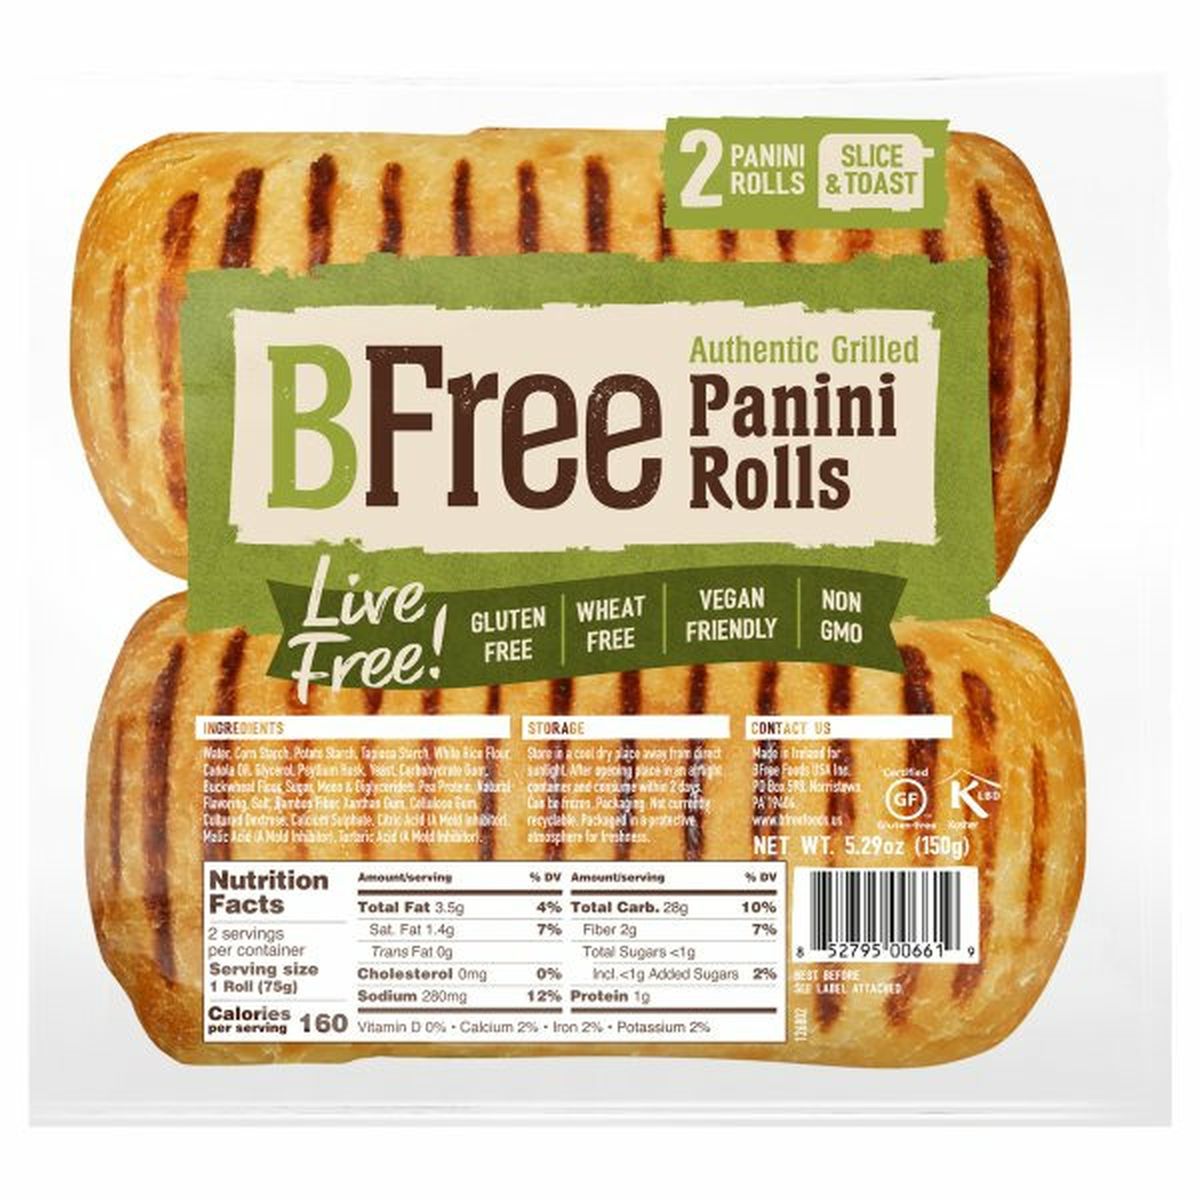 Calories in BFree Panini Rolls, Grilled